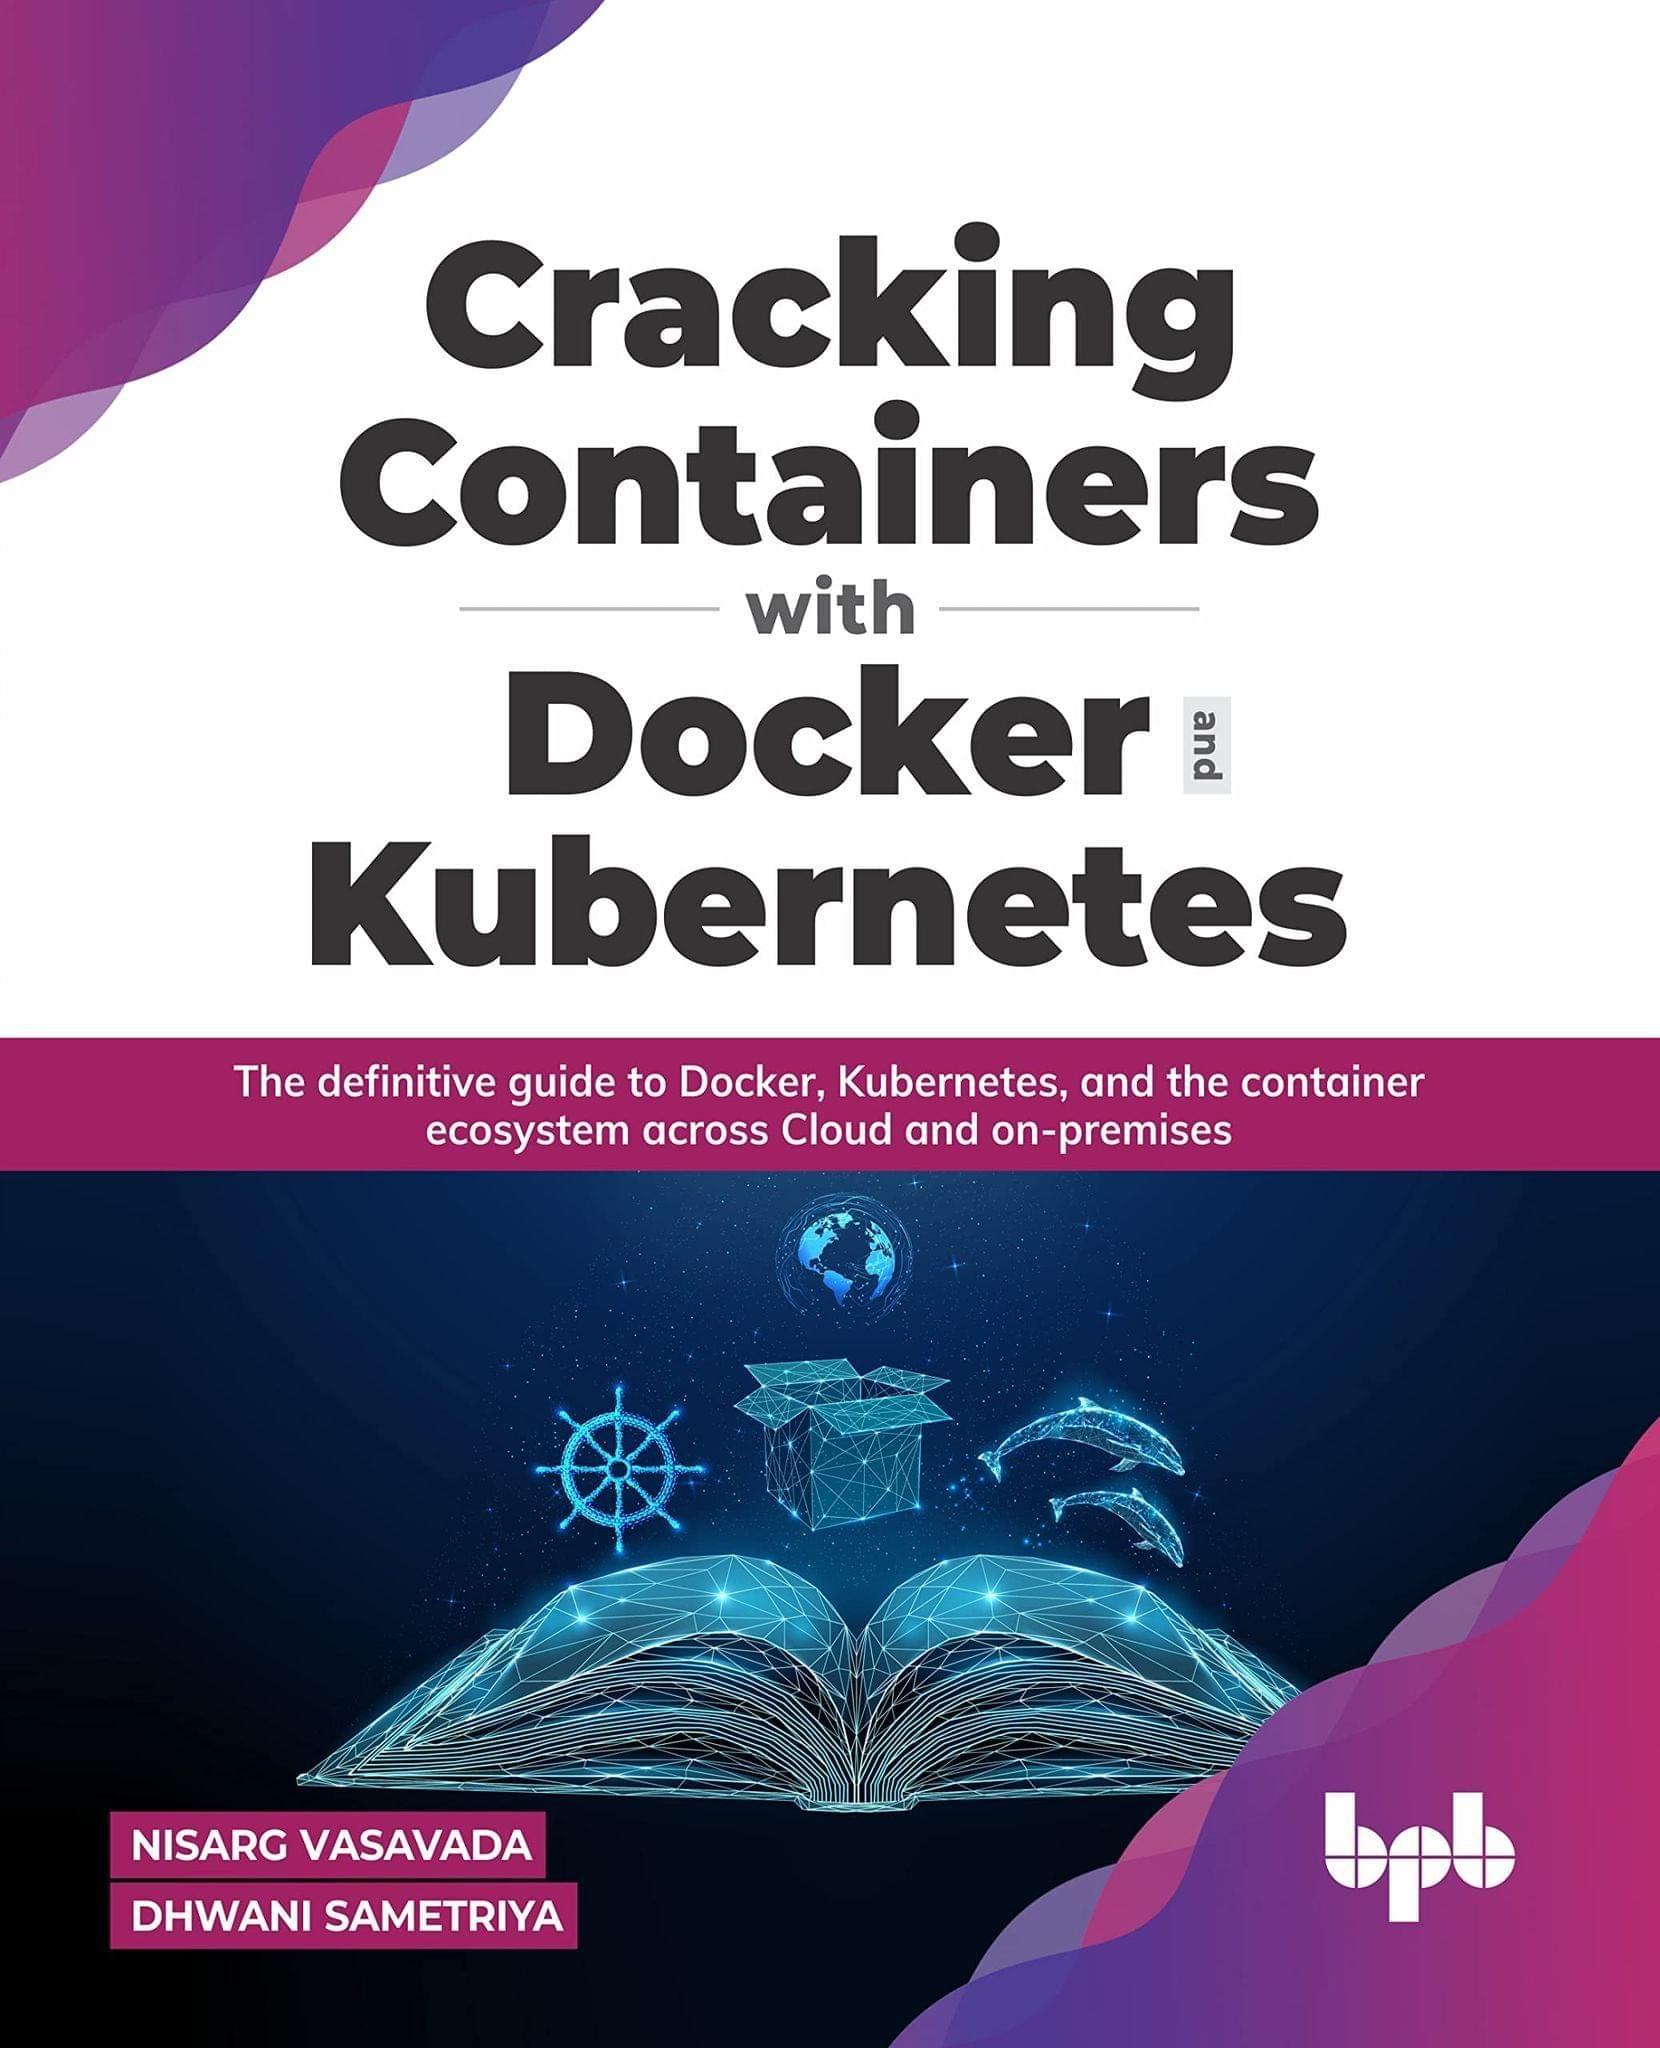 Cracking Containers with Docker and Kubernetes: The definitive guide to Docker, Kubernetes, and the Container Ecosystem across Cloud and on-premises [Paperback] Nisarg Vasavada and Dhwani Sametriya